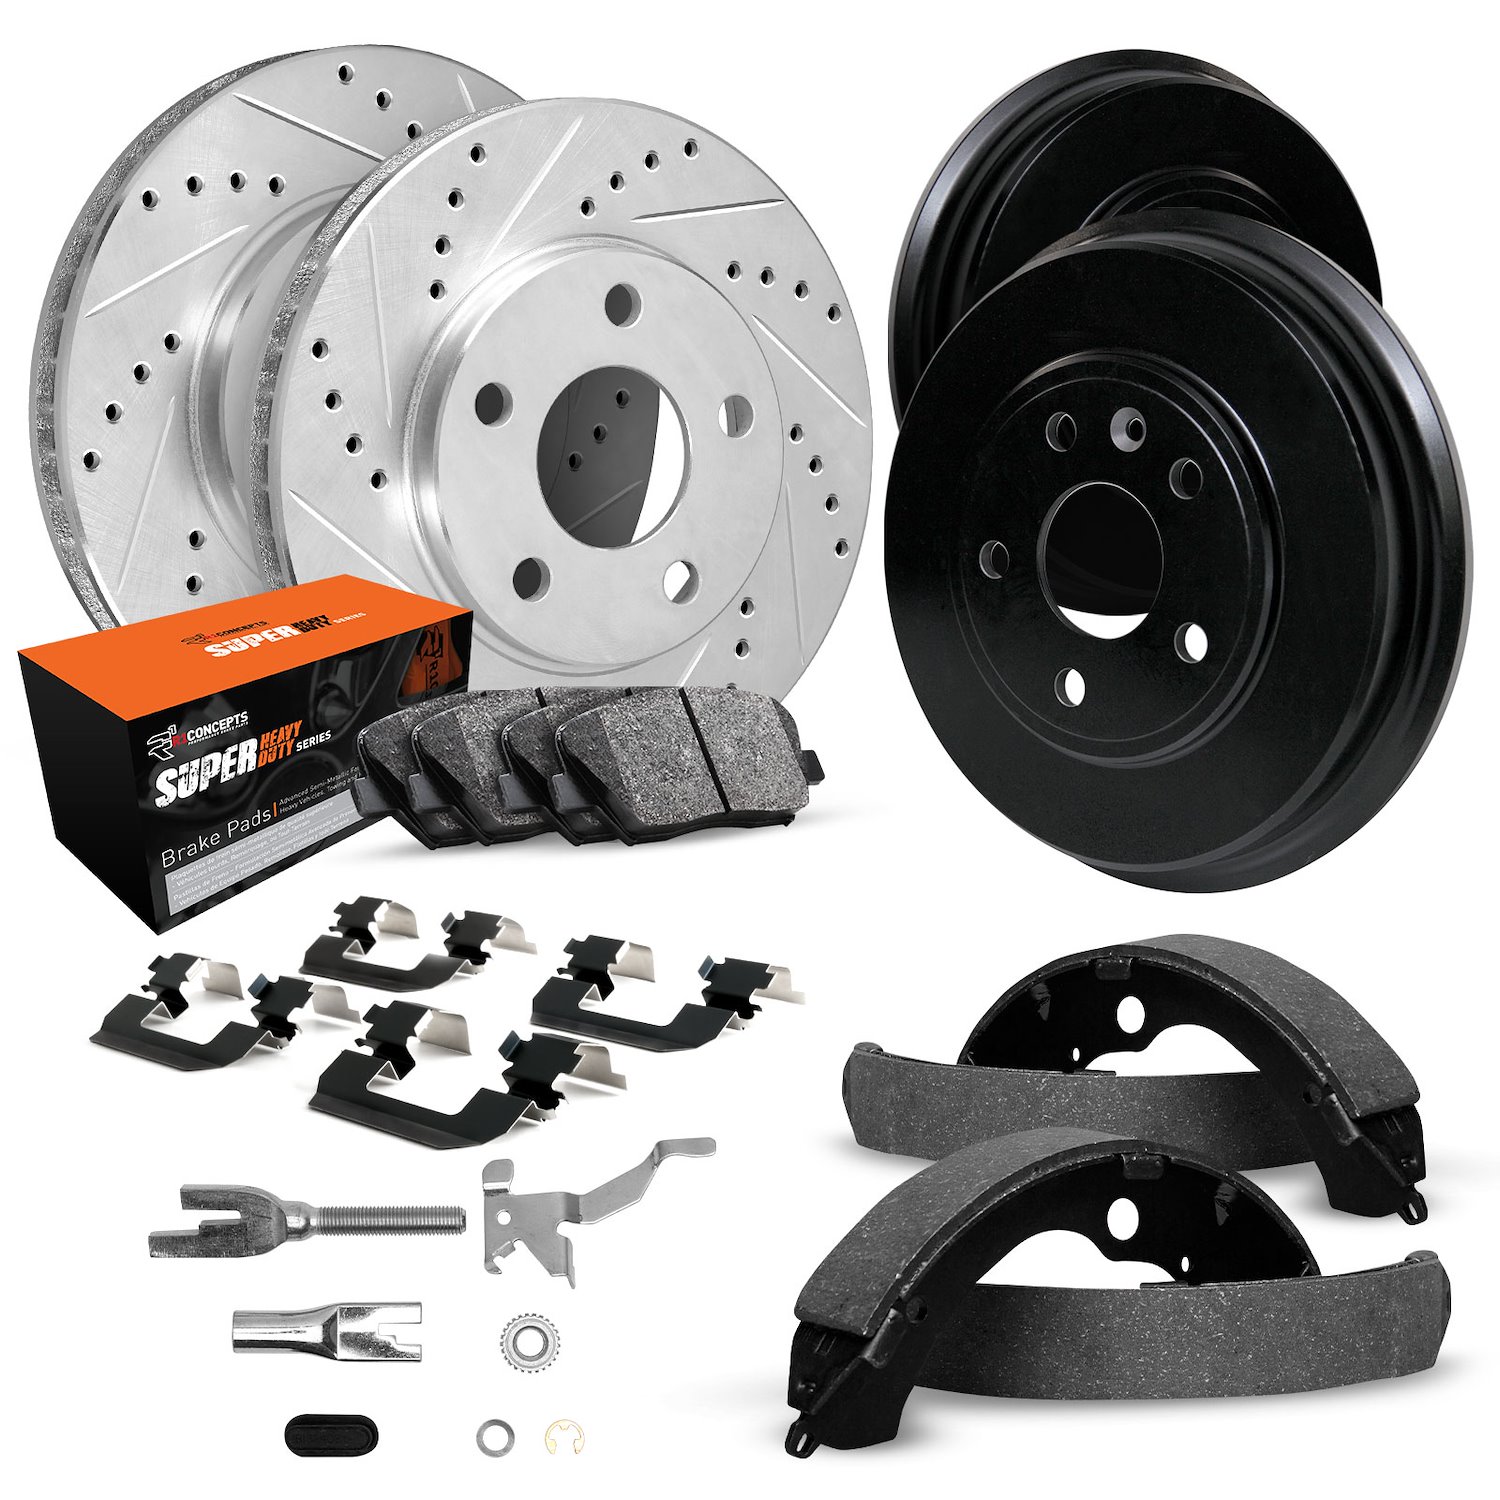 E-Line Drilled/Slotted Silver Rotor & Drum Set w/Super-Duty Pads, Shoes/Hardware/Adjusters, 1977-1979 Ford/Lincoln/Mercury/Mazda